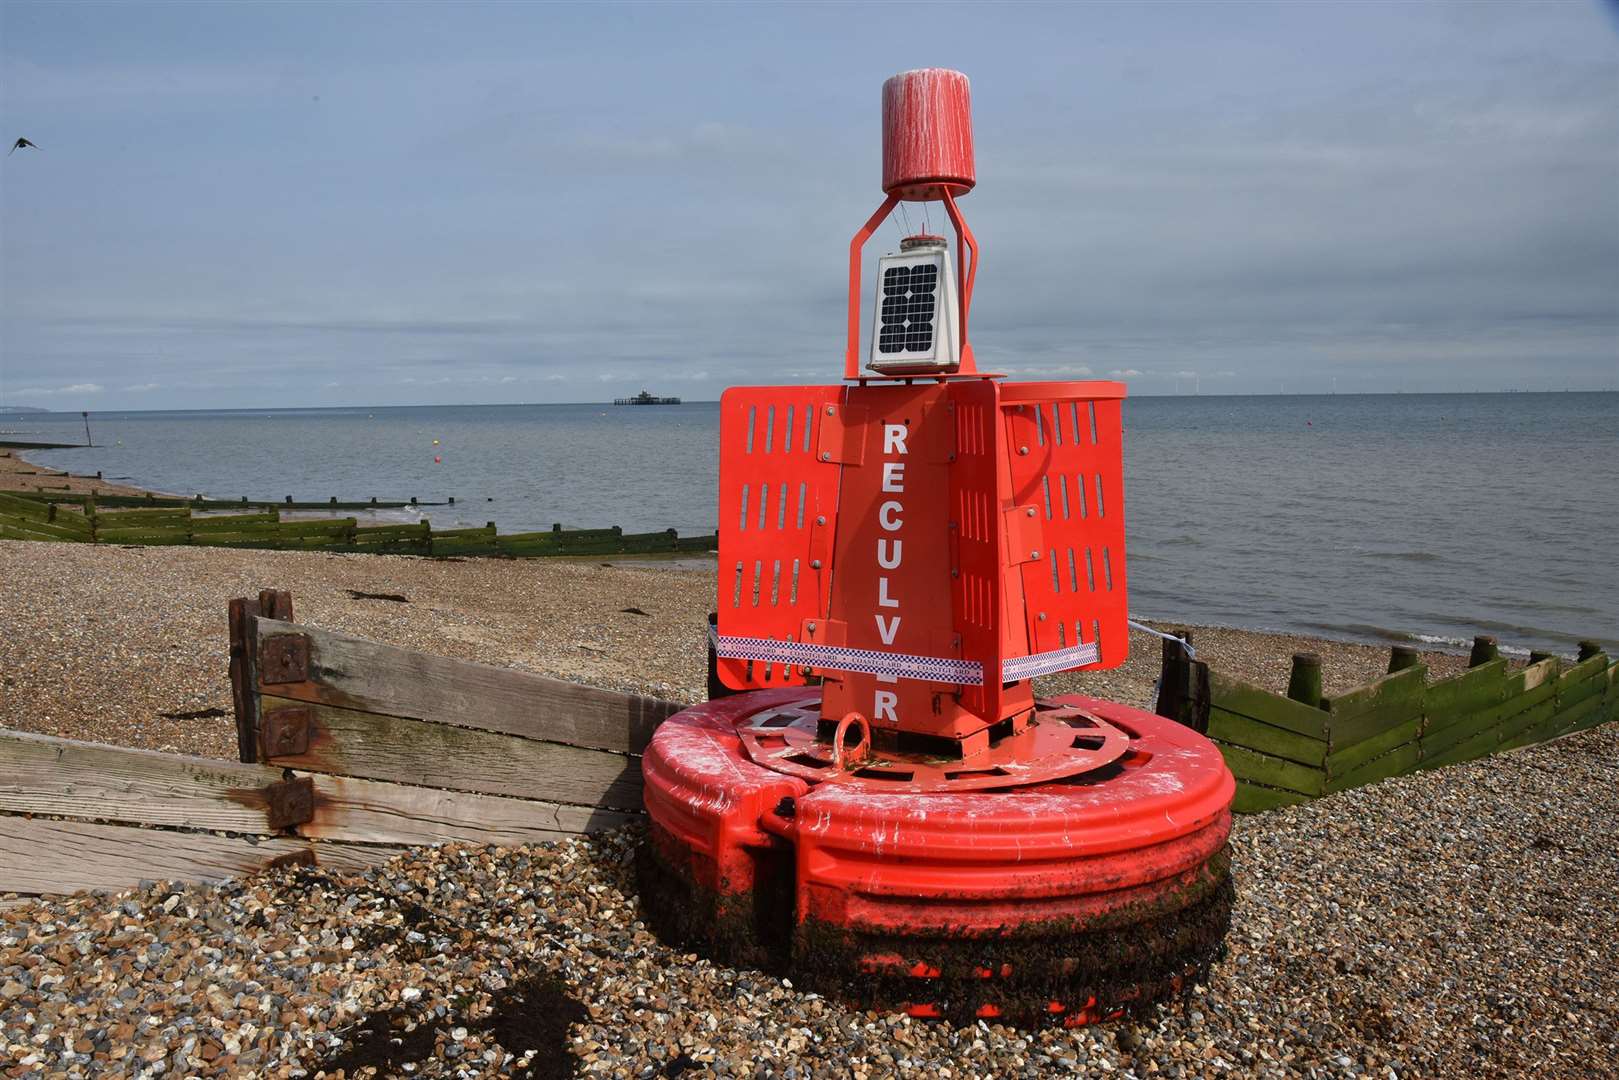 The buoy was discovered on Herne Bay seafront this morning. Picture: Dylan Woolf